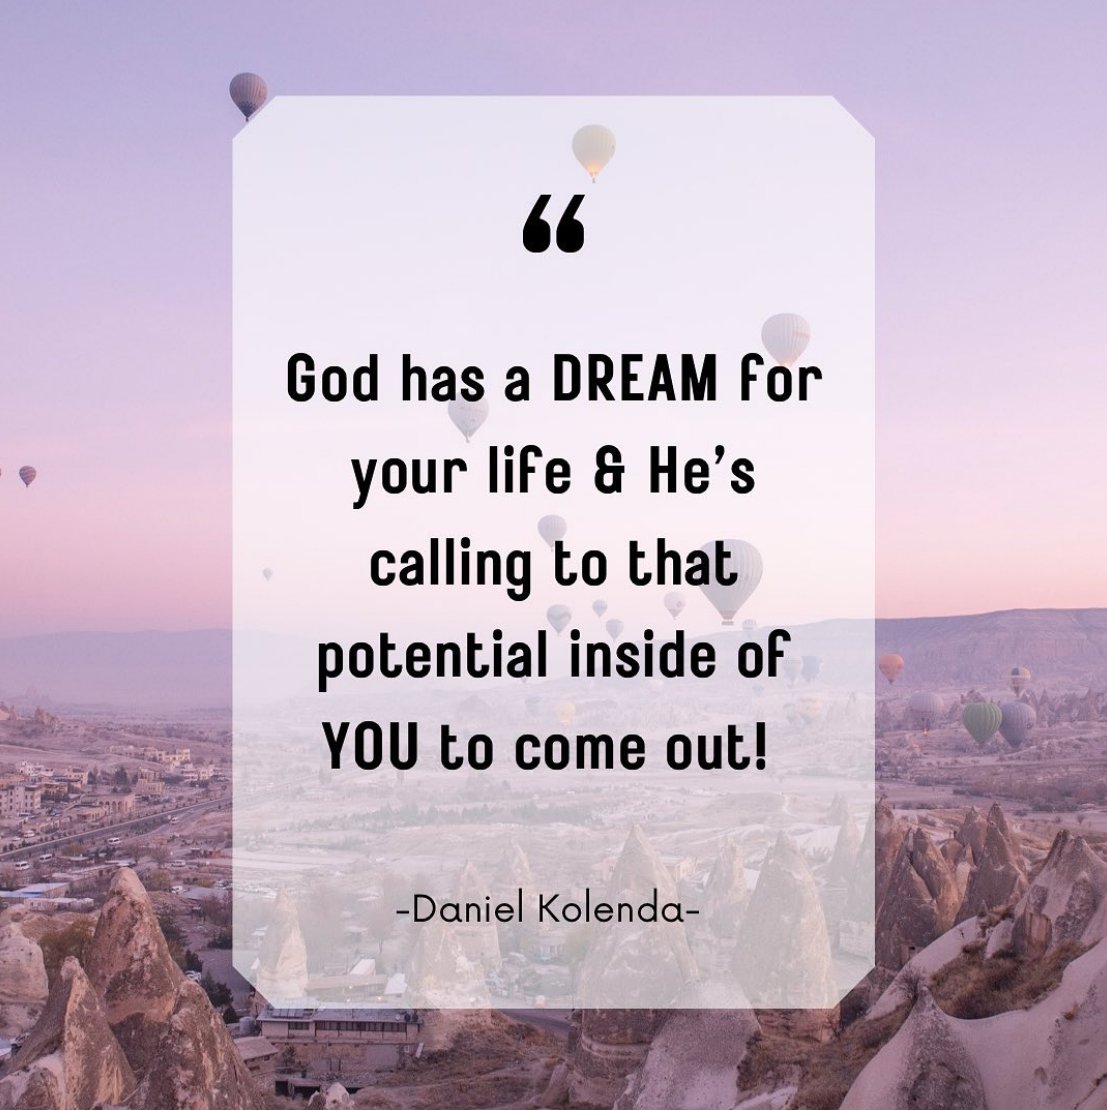 Christ For All Nations UK on X: “God has a DREAM for your life